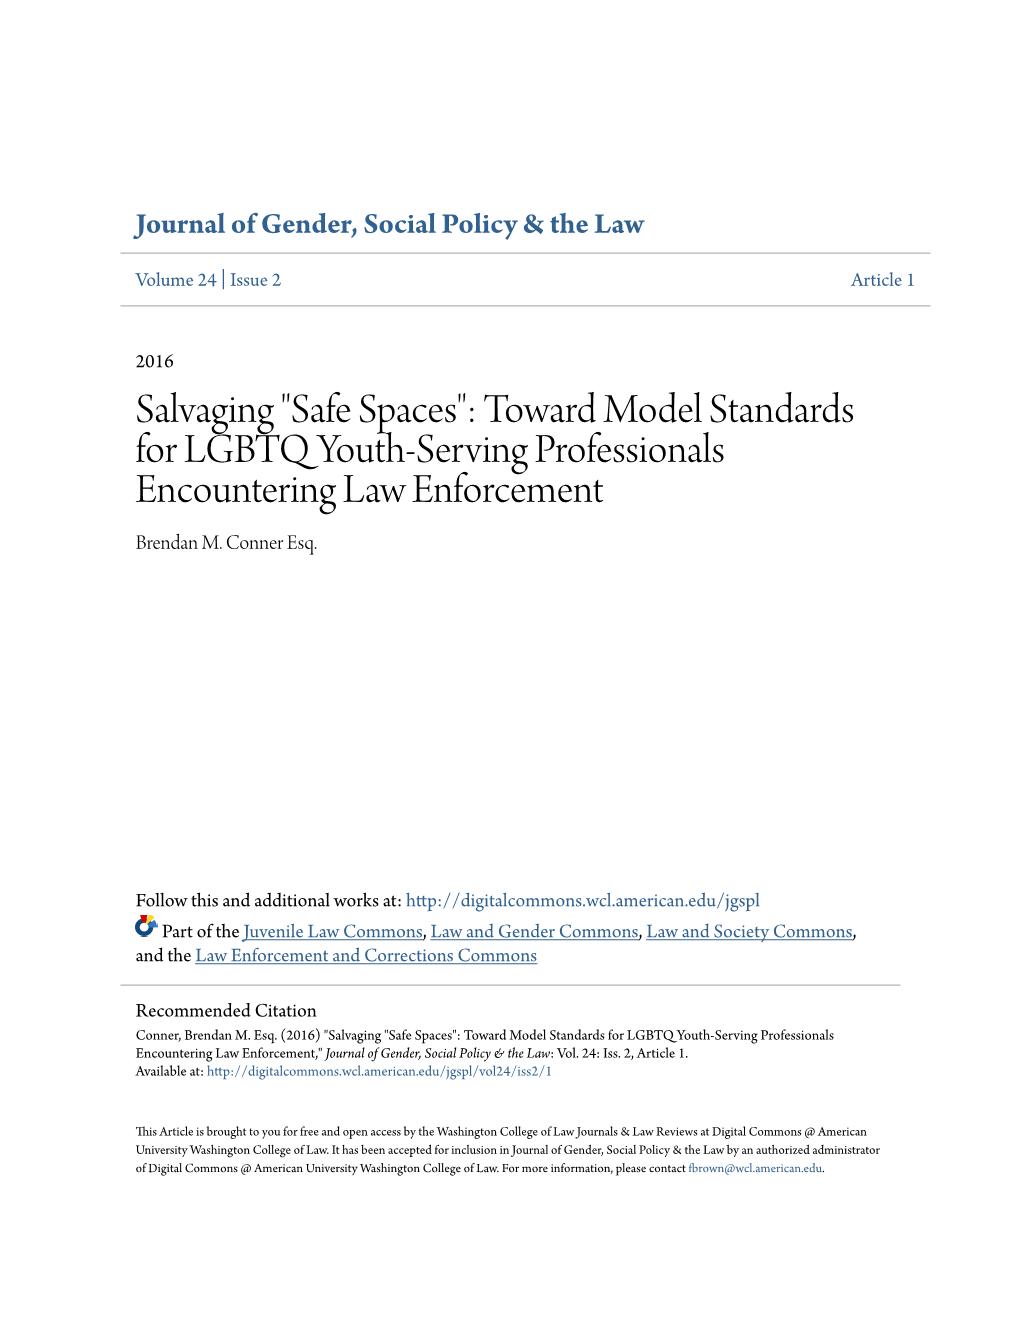 Safe Spaces": Toward Model Standards for LGBTQ Youth-Serving Professionals Encountering Law Enforcement Brendan M